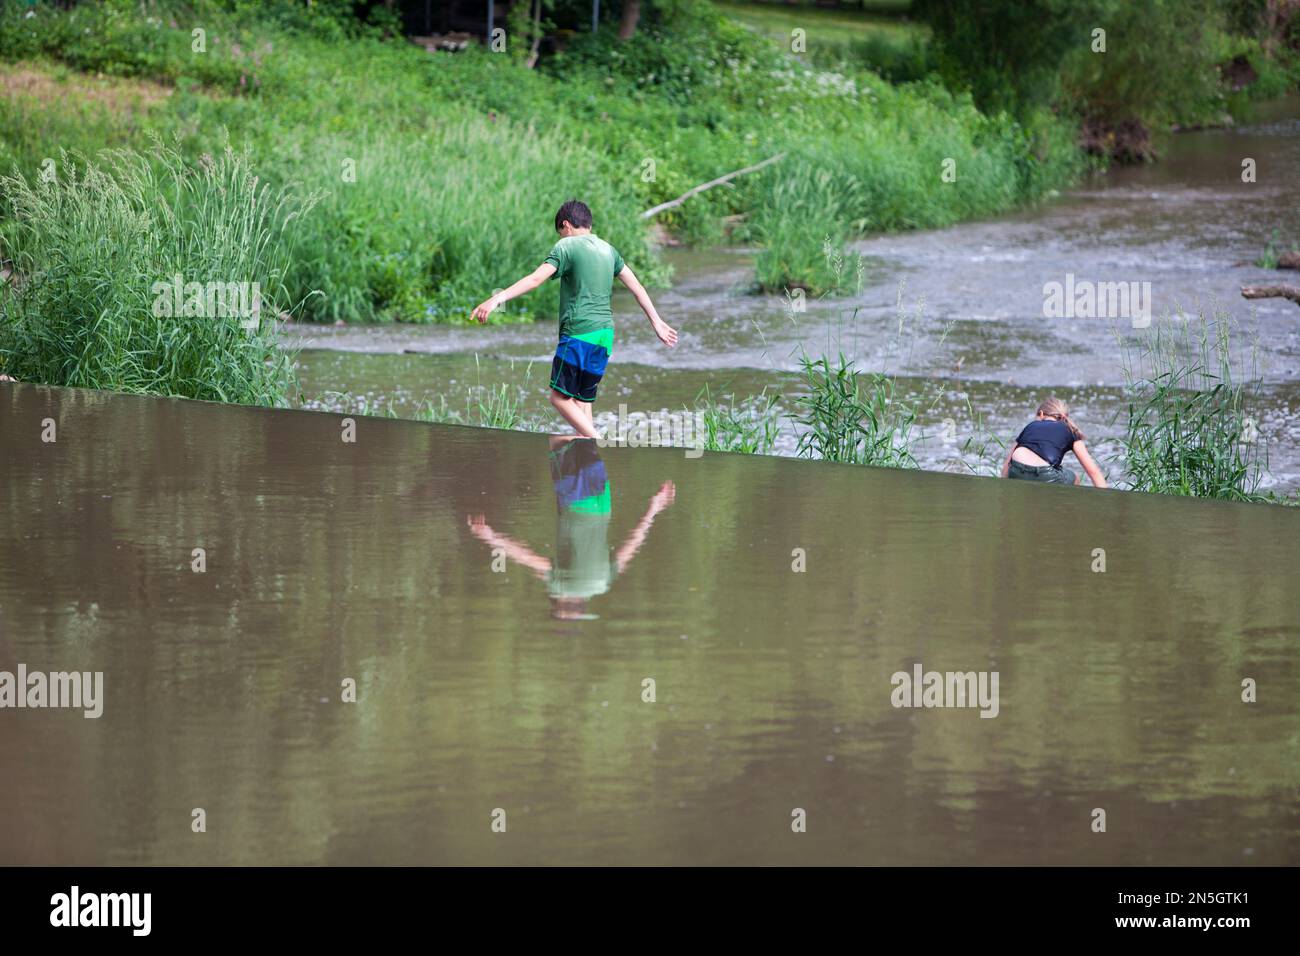 Children playing at the weir of River Diemel, Trendelburg, district of Kassel, Hesse, Germany Stock Photo